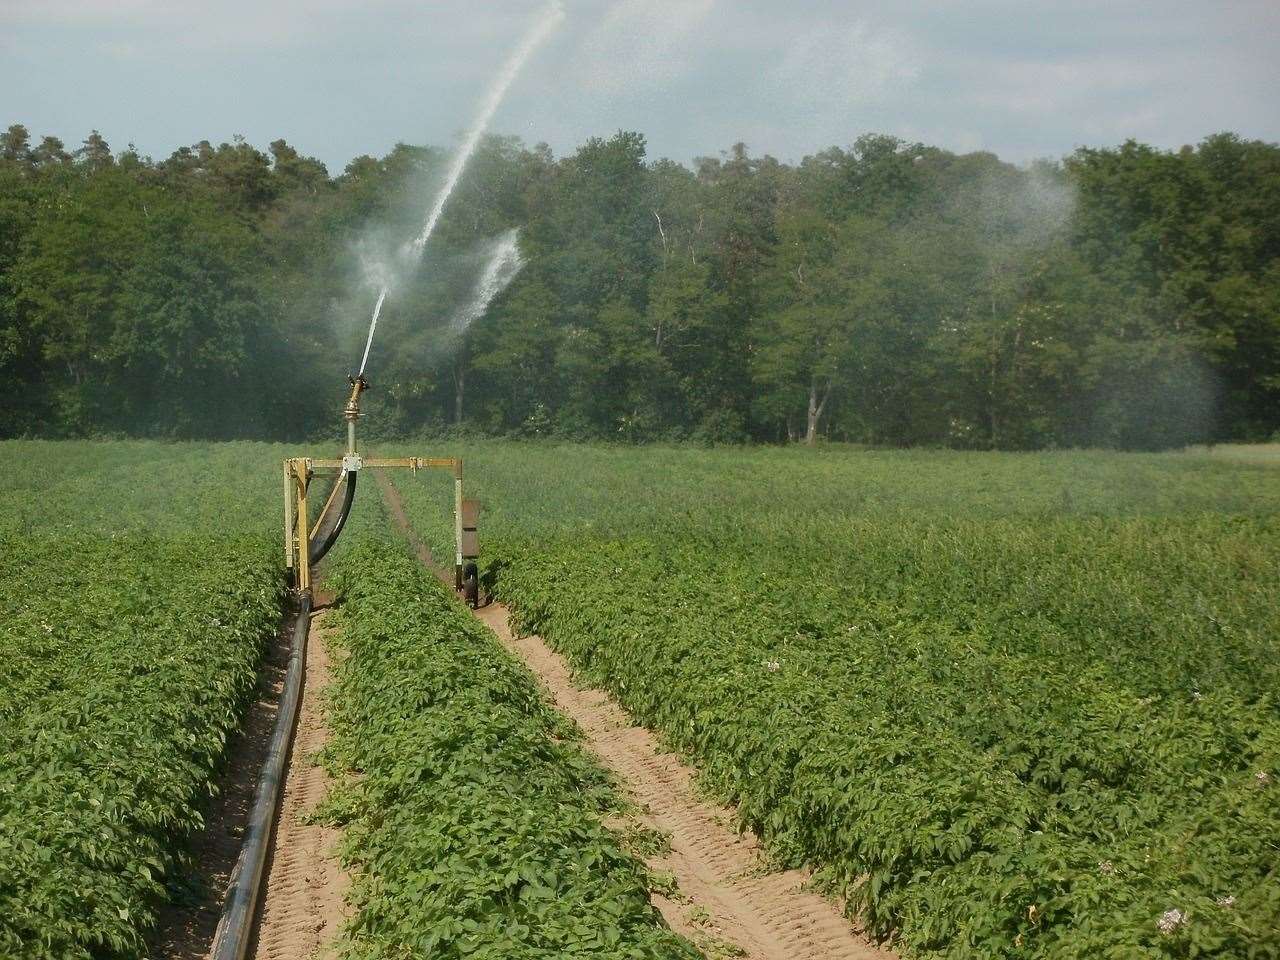 Farms are being asked to be cautious with irrigation